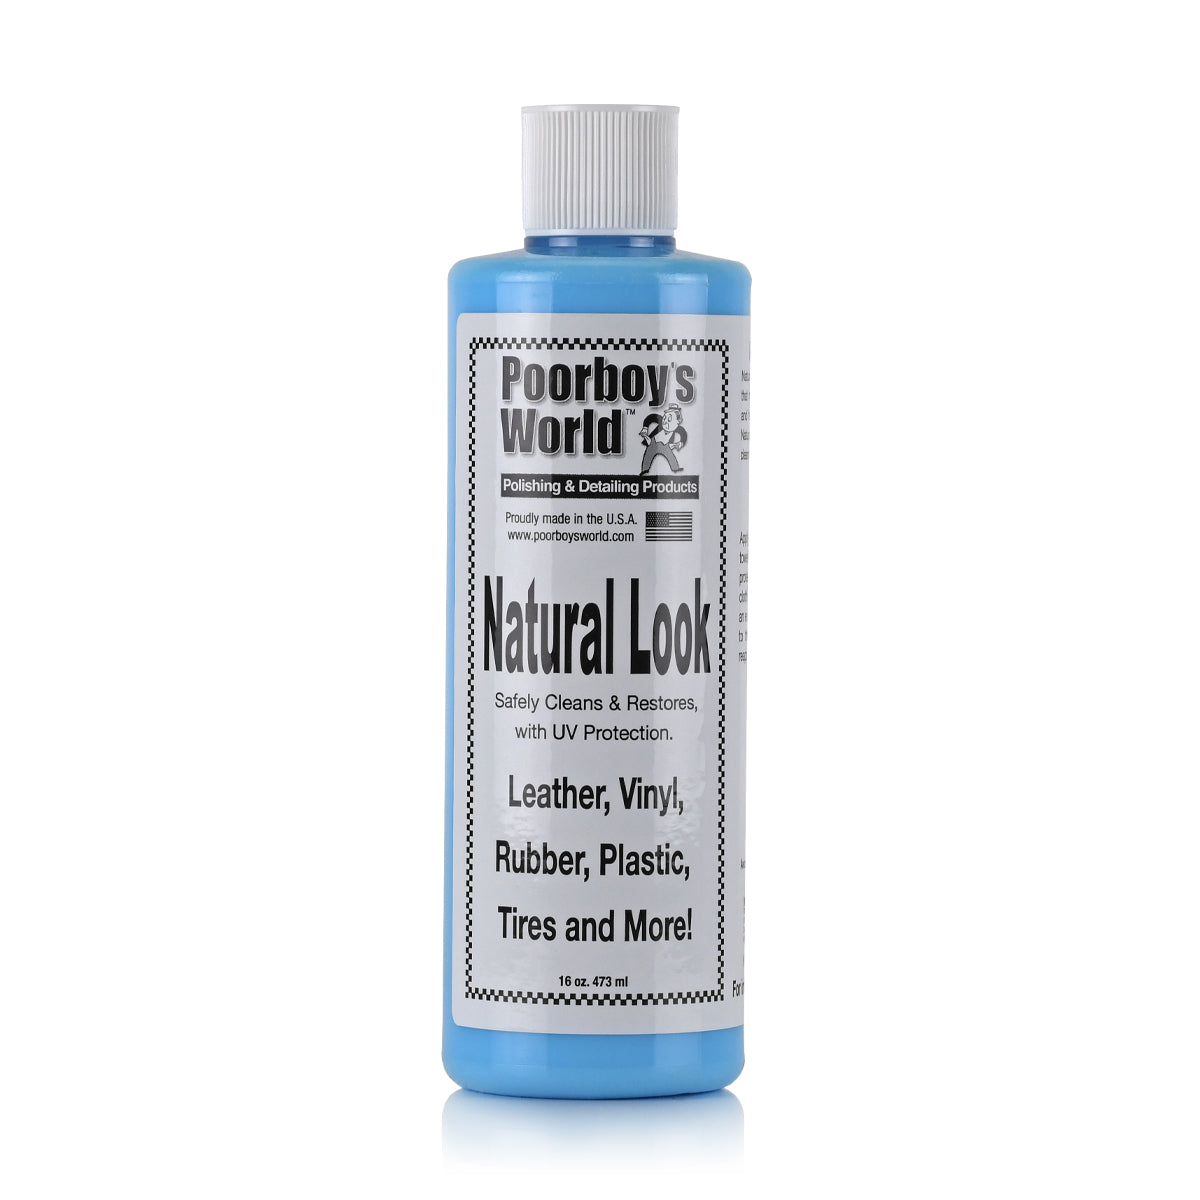 Poorboy's World - Natural Look Dressing